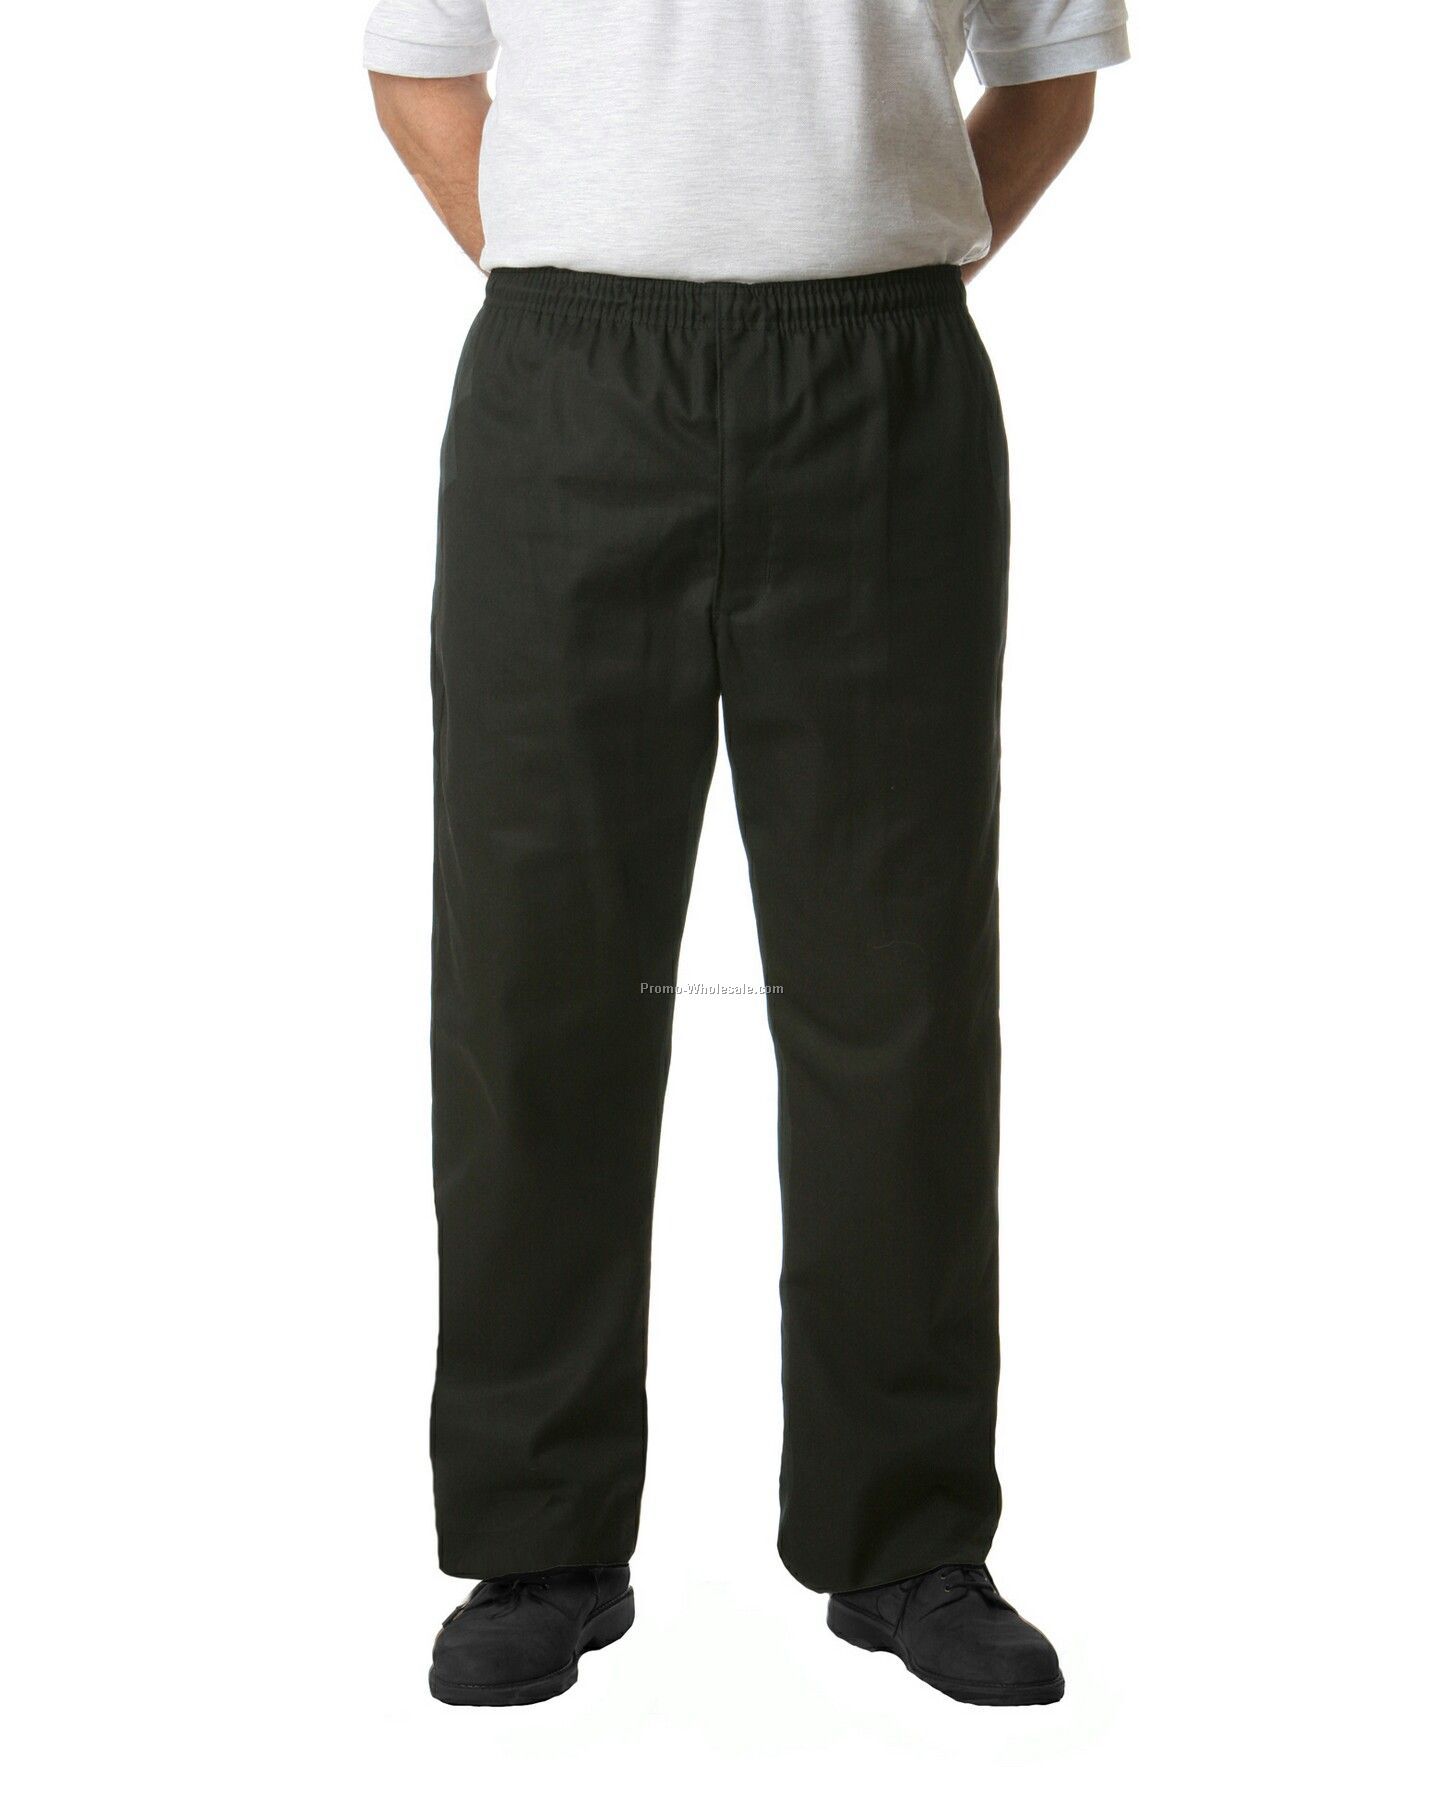 Chef Baggies Pants (Large/ Houndstooth)